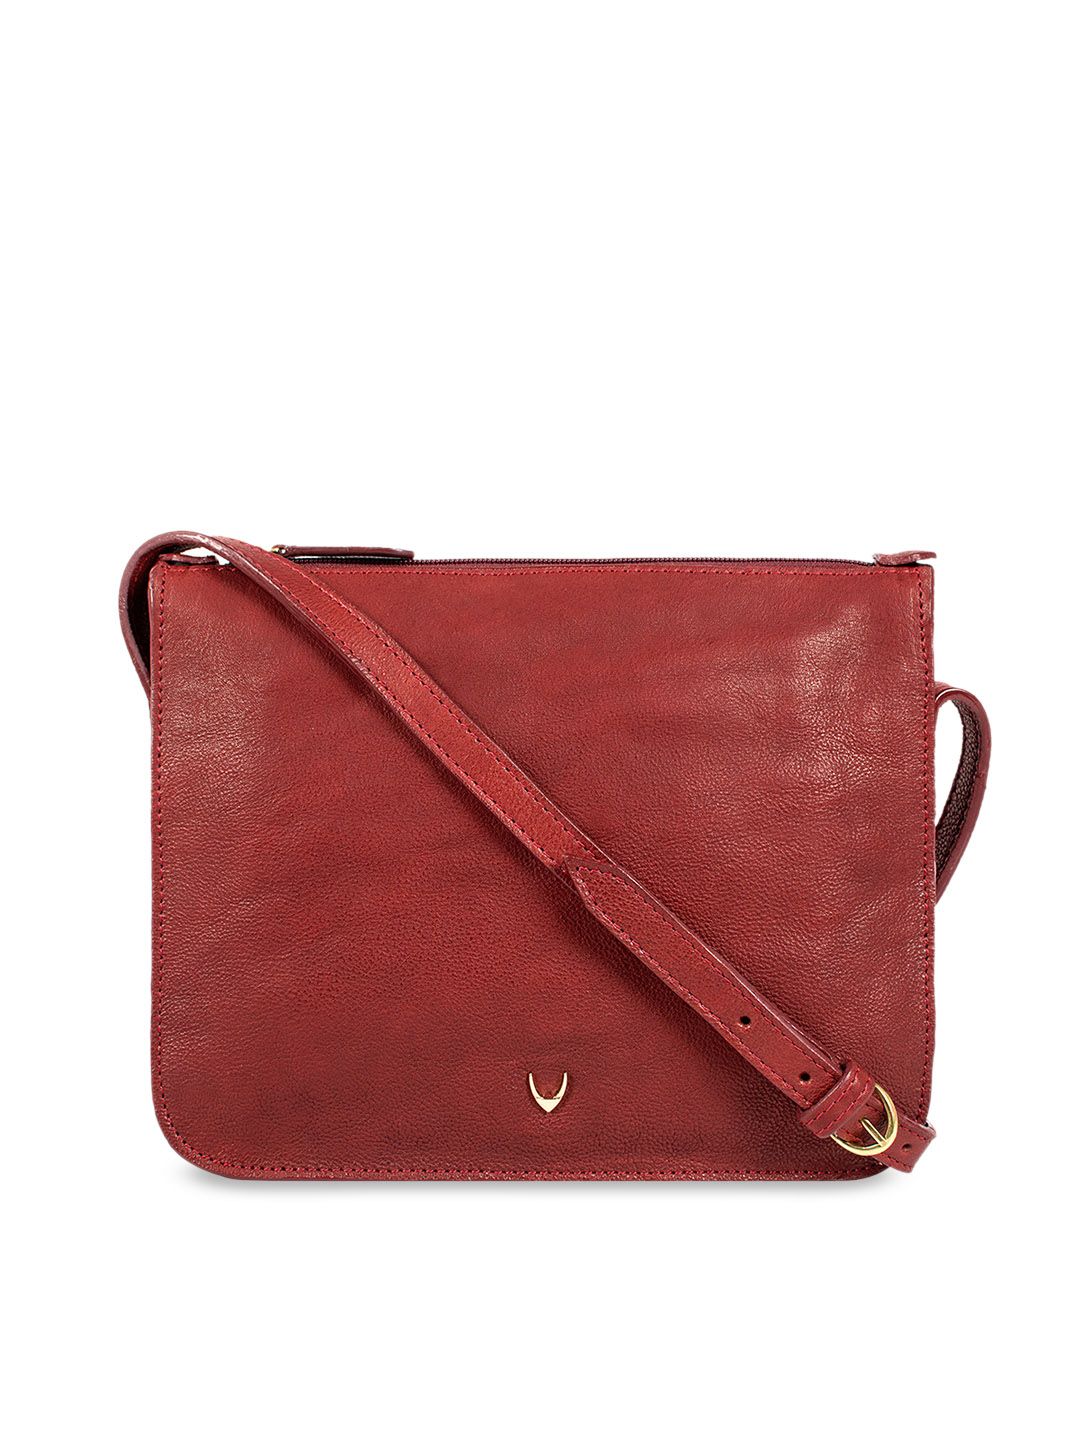 Hidesign Maroon Solid Leather Sling Bag Price in India